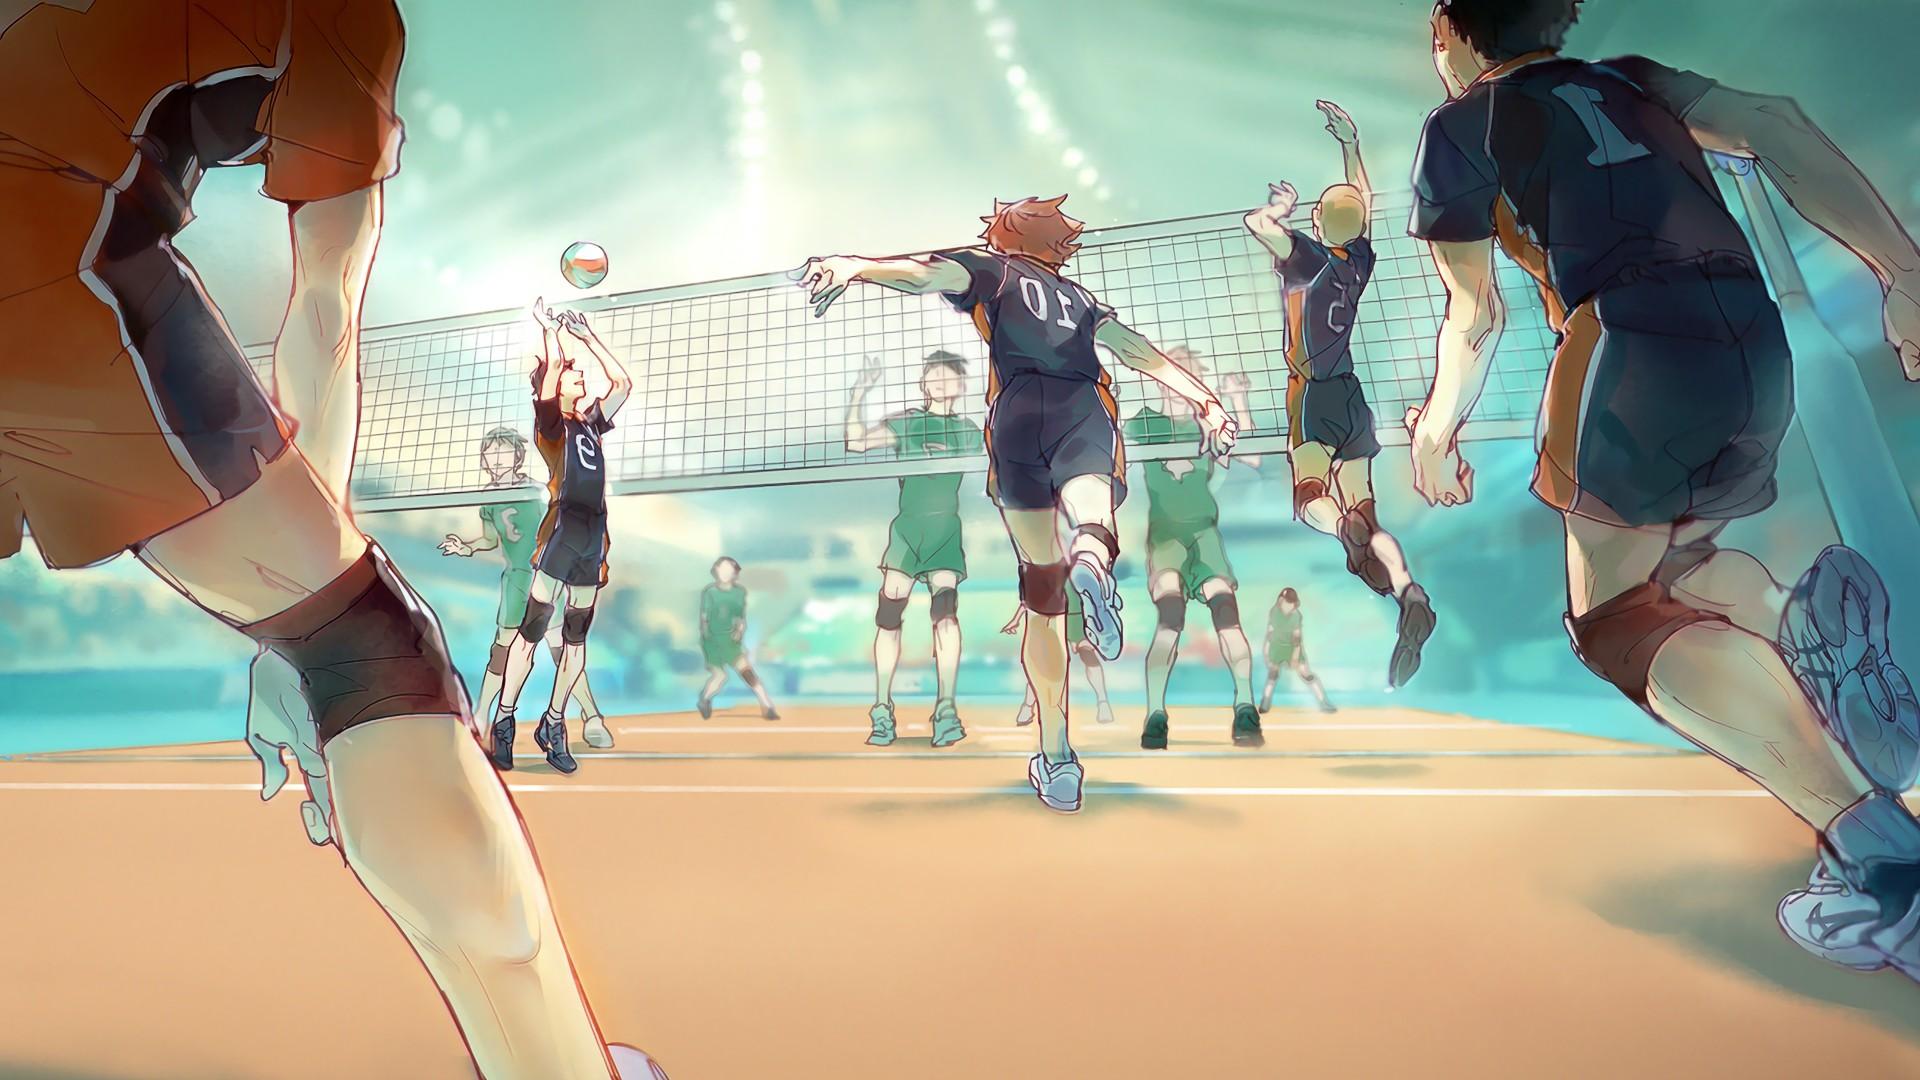 1920 x 1080 · jpeg - Haikyuu wallpaper 1 Download free cool High Resolution wallpapers for ...